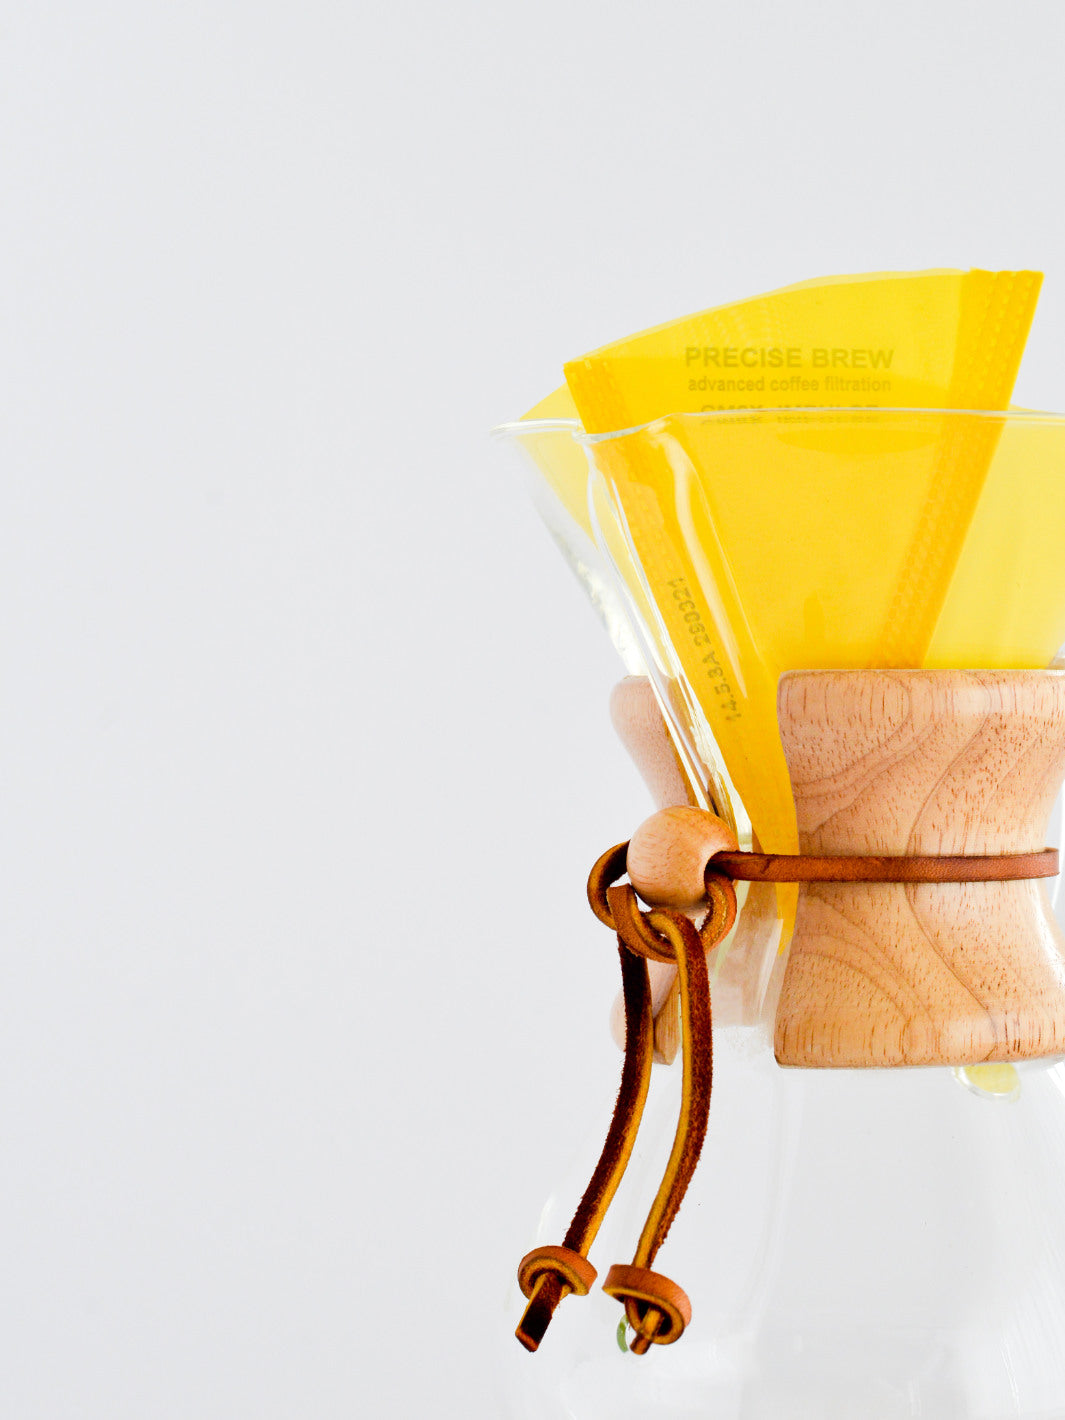 PRECISE BREW CHEMEX® 6-Cup Filters